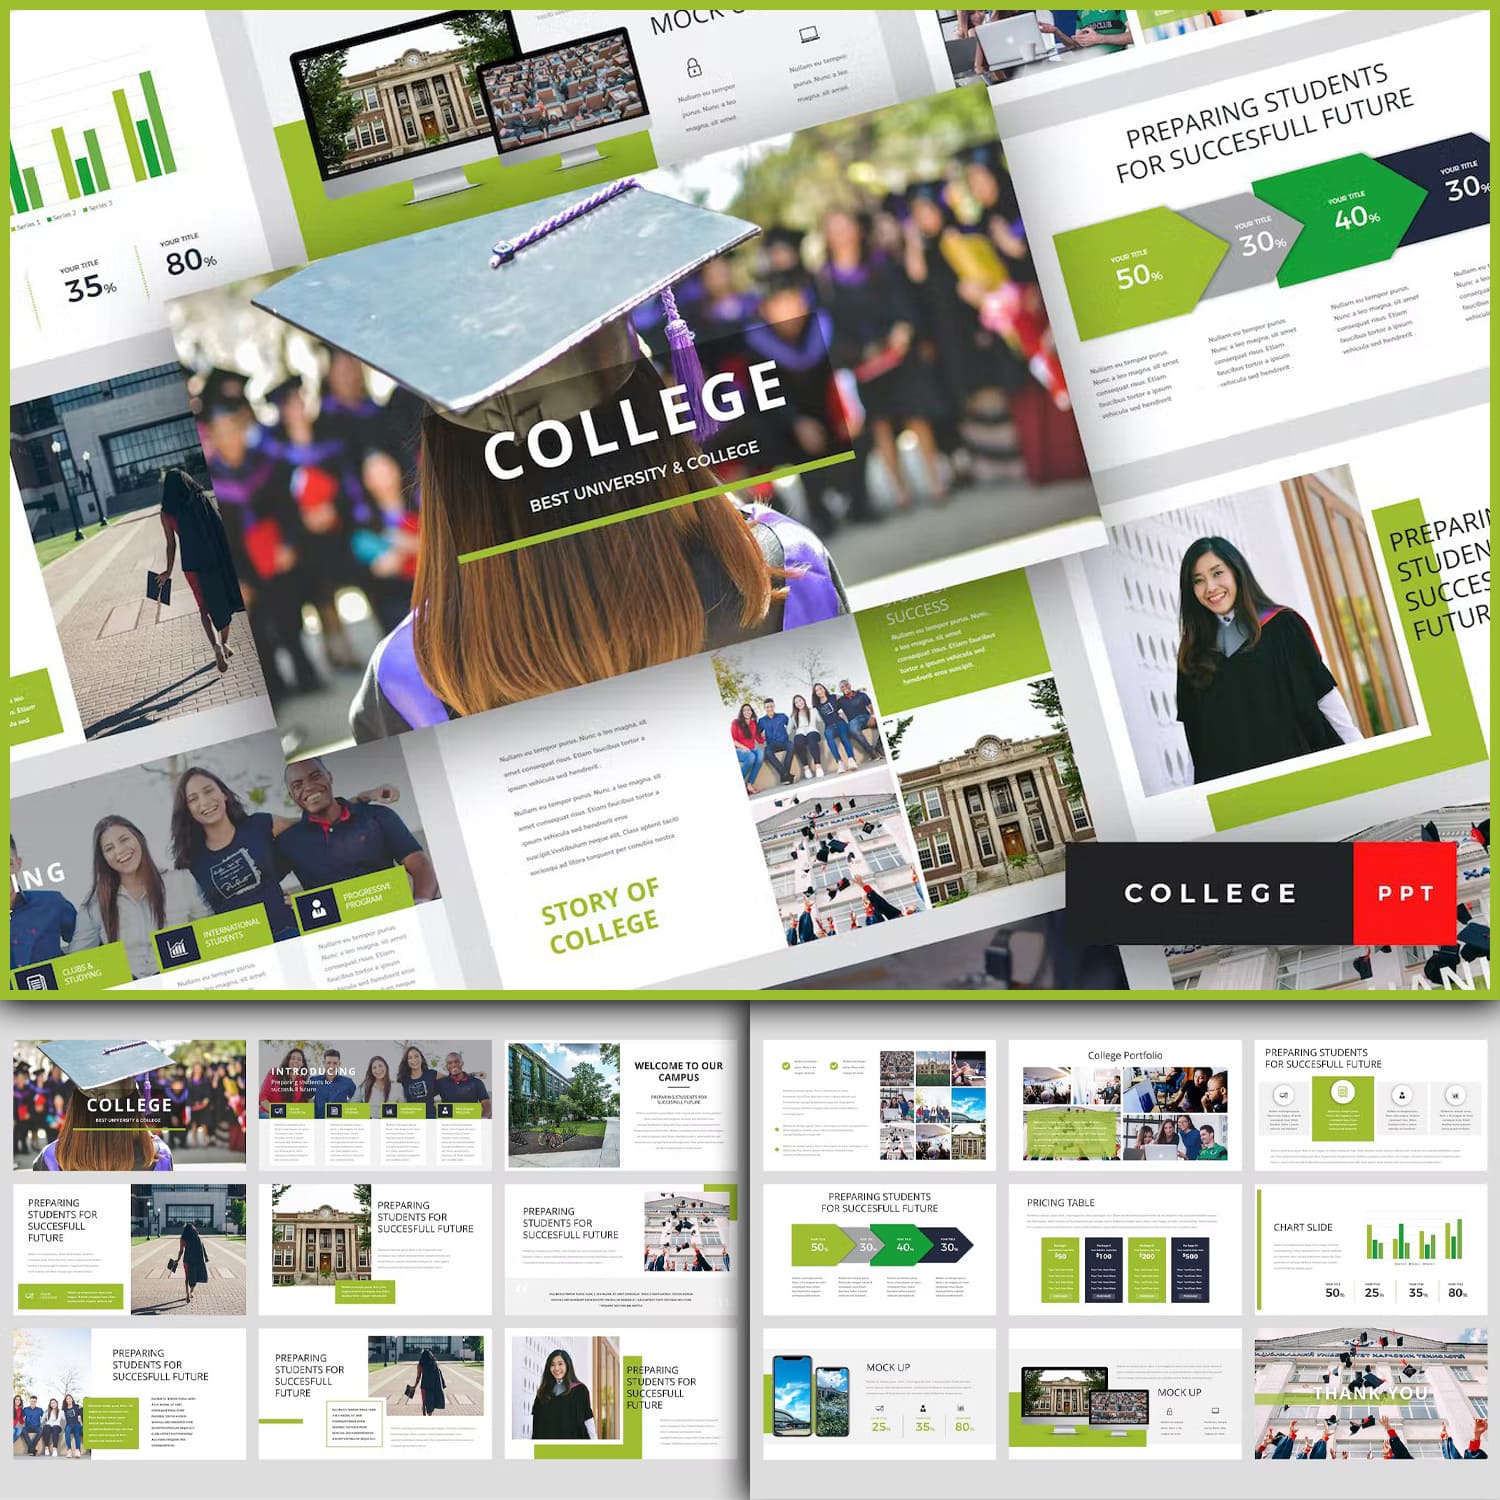 College - University PowerPoint Template.